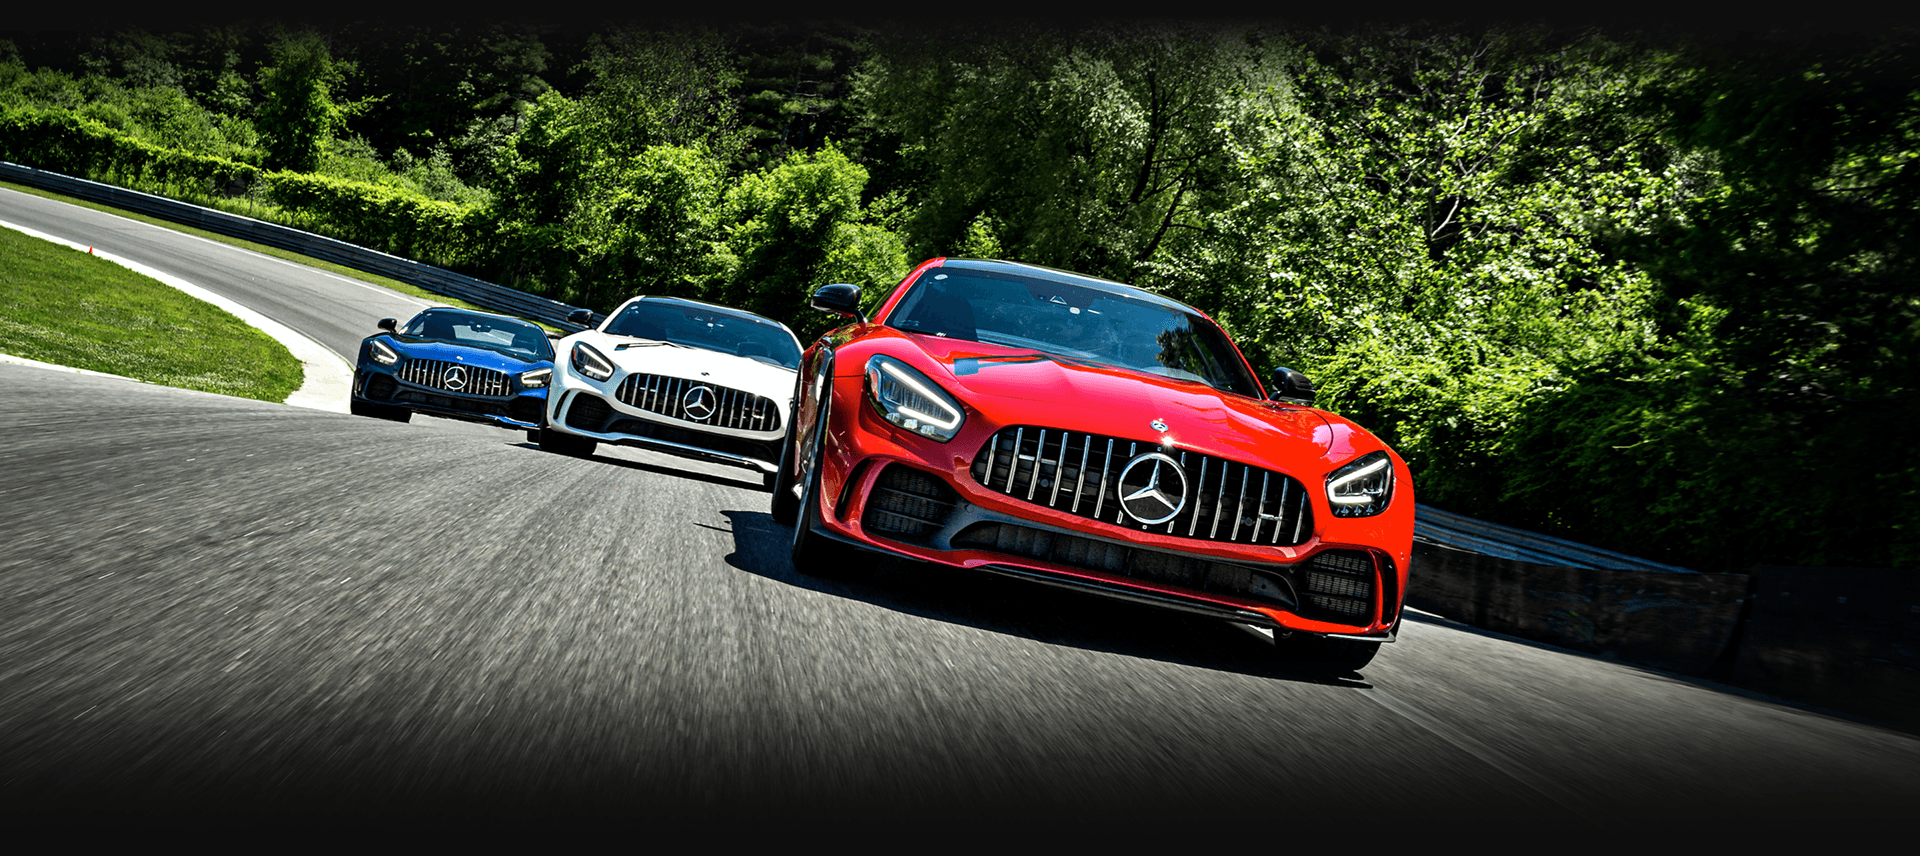 4)	Three Mercedes-AMG vehicles, red, white and blue racing on Lime Rock Park track